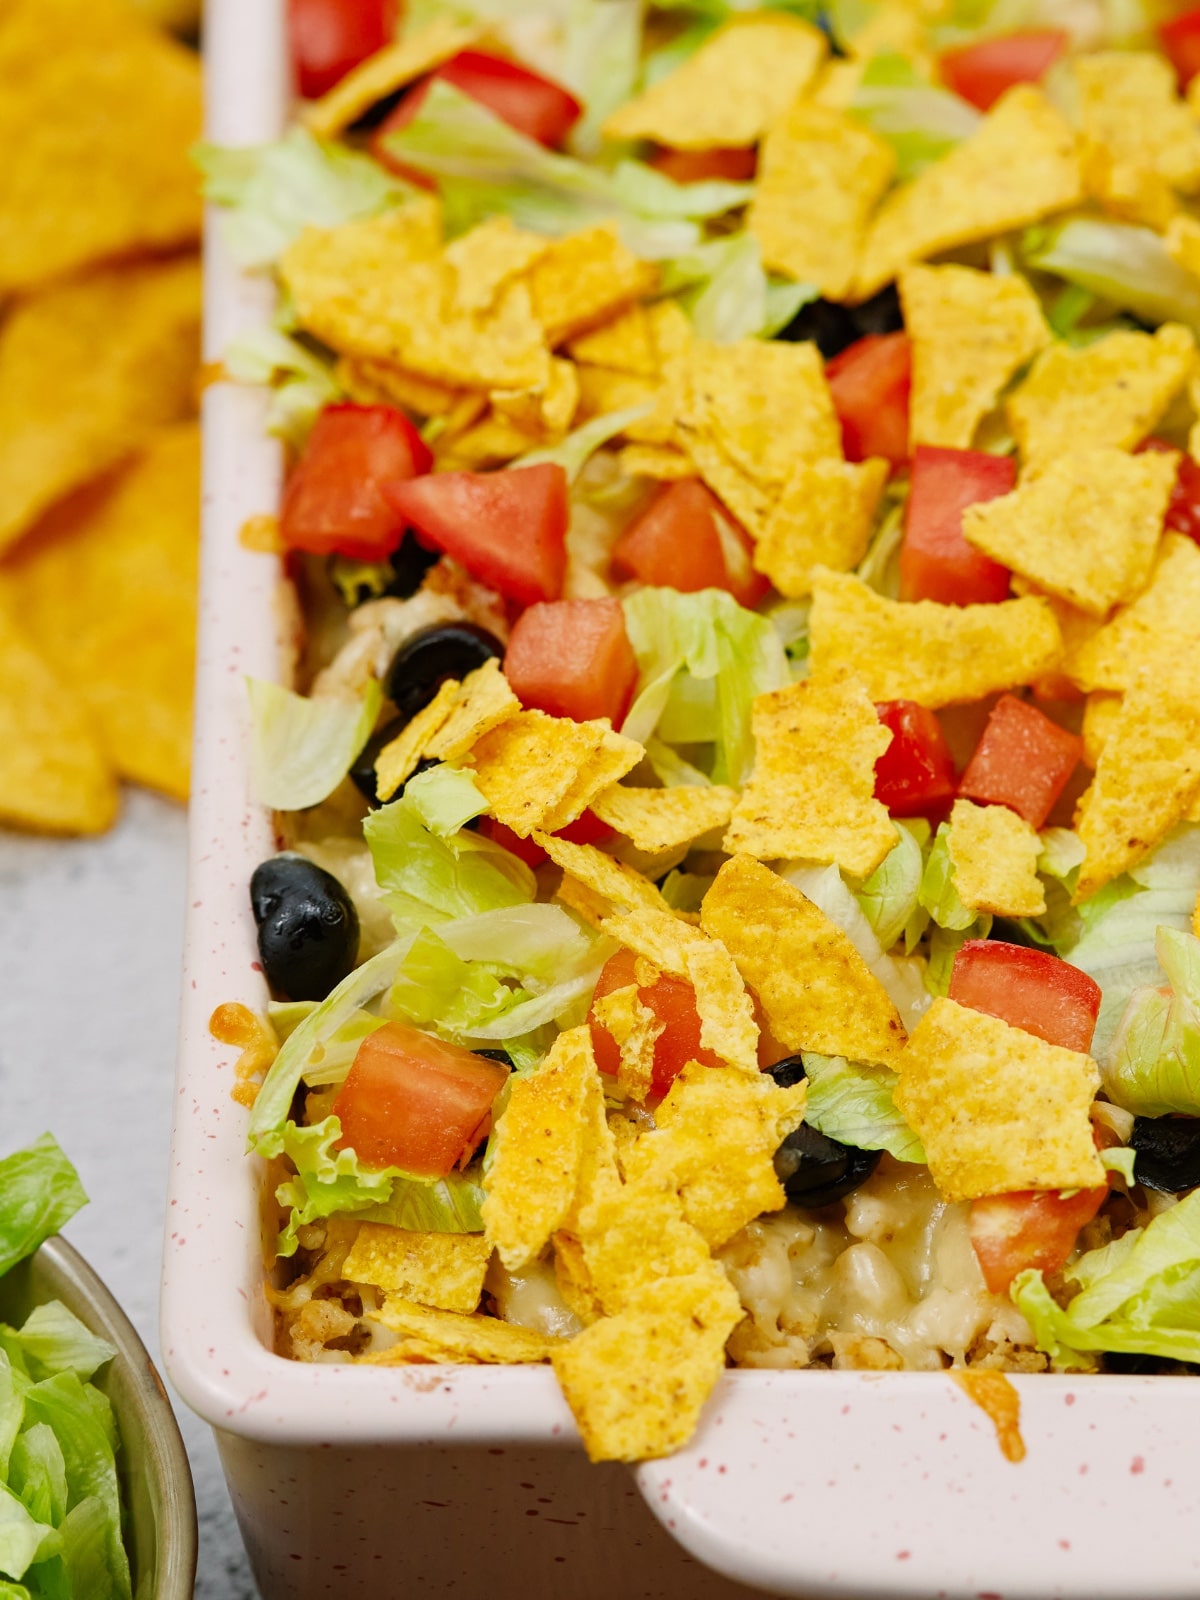 Mexican casserole in a white baking dish topped with tortilla chips, tomatoes, olives, and lettuce